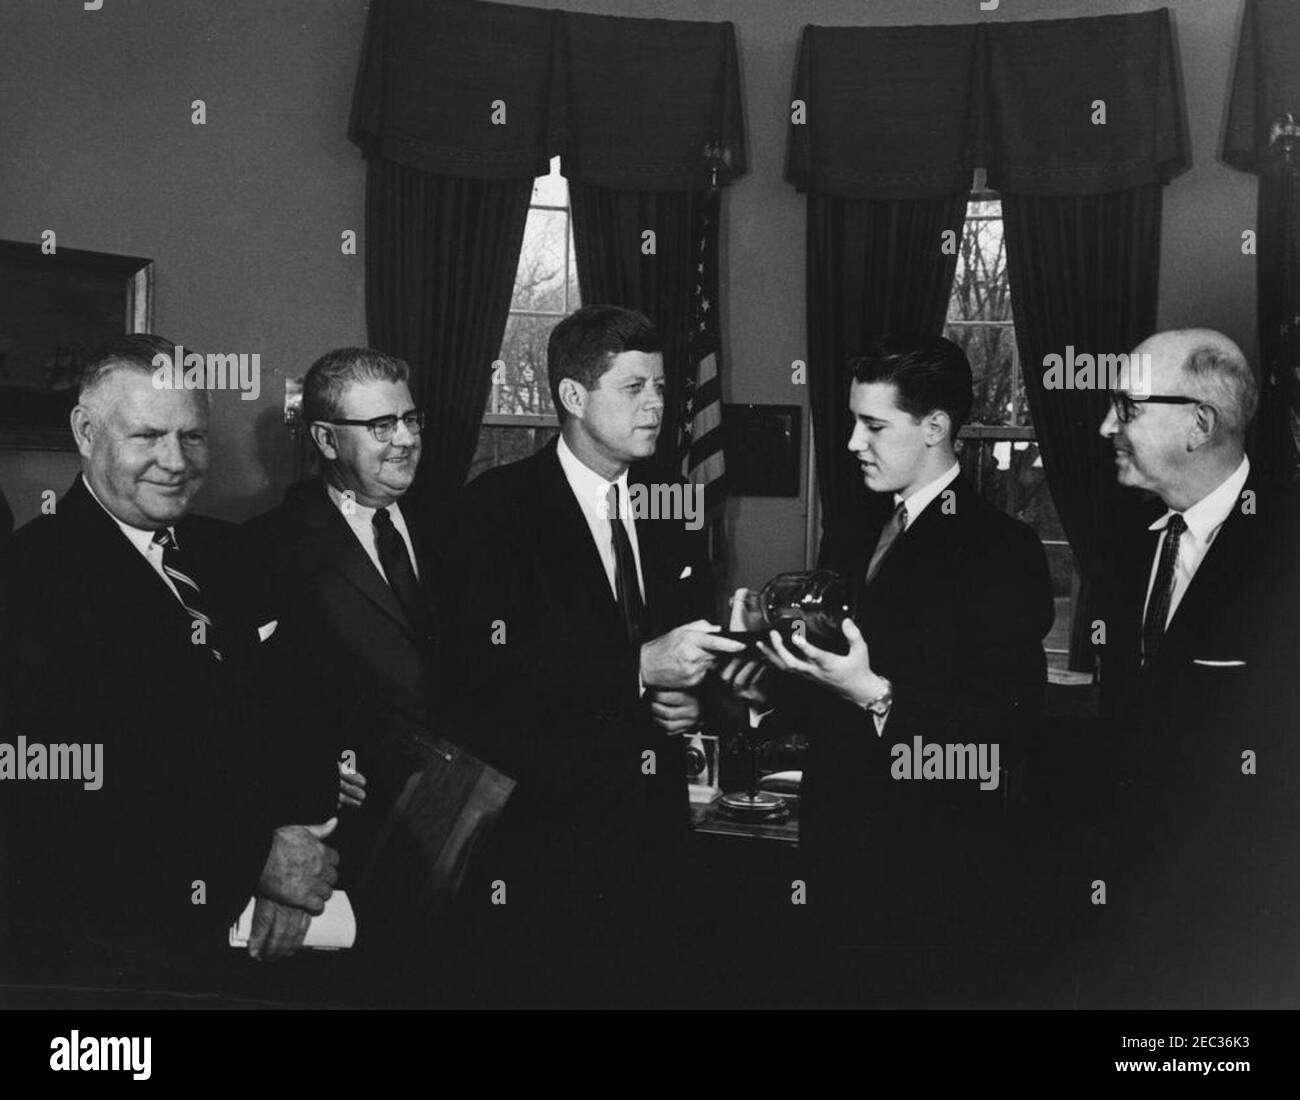 Visit of the Boysu0027 Clubsu0027 u0022Boy of the Year,u0022 Stephen Lutz, 10:57AM. President John F. Kennedy (center) holds a scale model, enclosed inside a bottle, of PT Boat 109, presented to him by the Boysu0027 Clubs of Americau0027s (BCA) u0022Boy of the Yearu0022 Stephen Lutz of Newark, New Jersey. (L-R) Albert L. Cole, President of the BCA; John M. Gleason, National Director of the BCA; President Kennedy; Stephen Lutz; and Charles R. Messier, Executive Director of the Boysu0027 Clubs of Newark, New Jersey. Oval Office, White House, Washington, D.C. Stock Photo